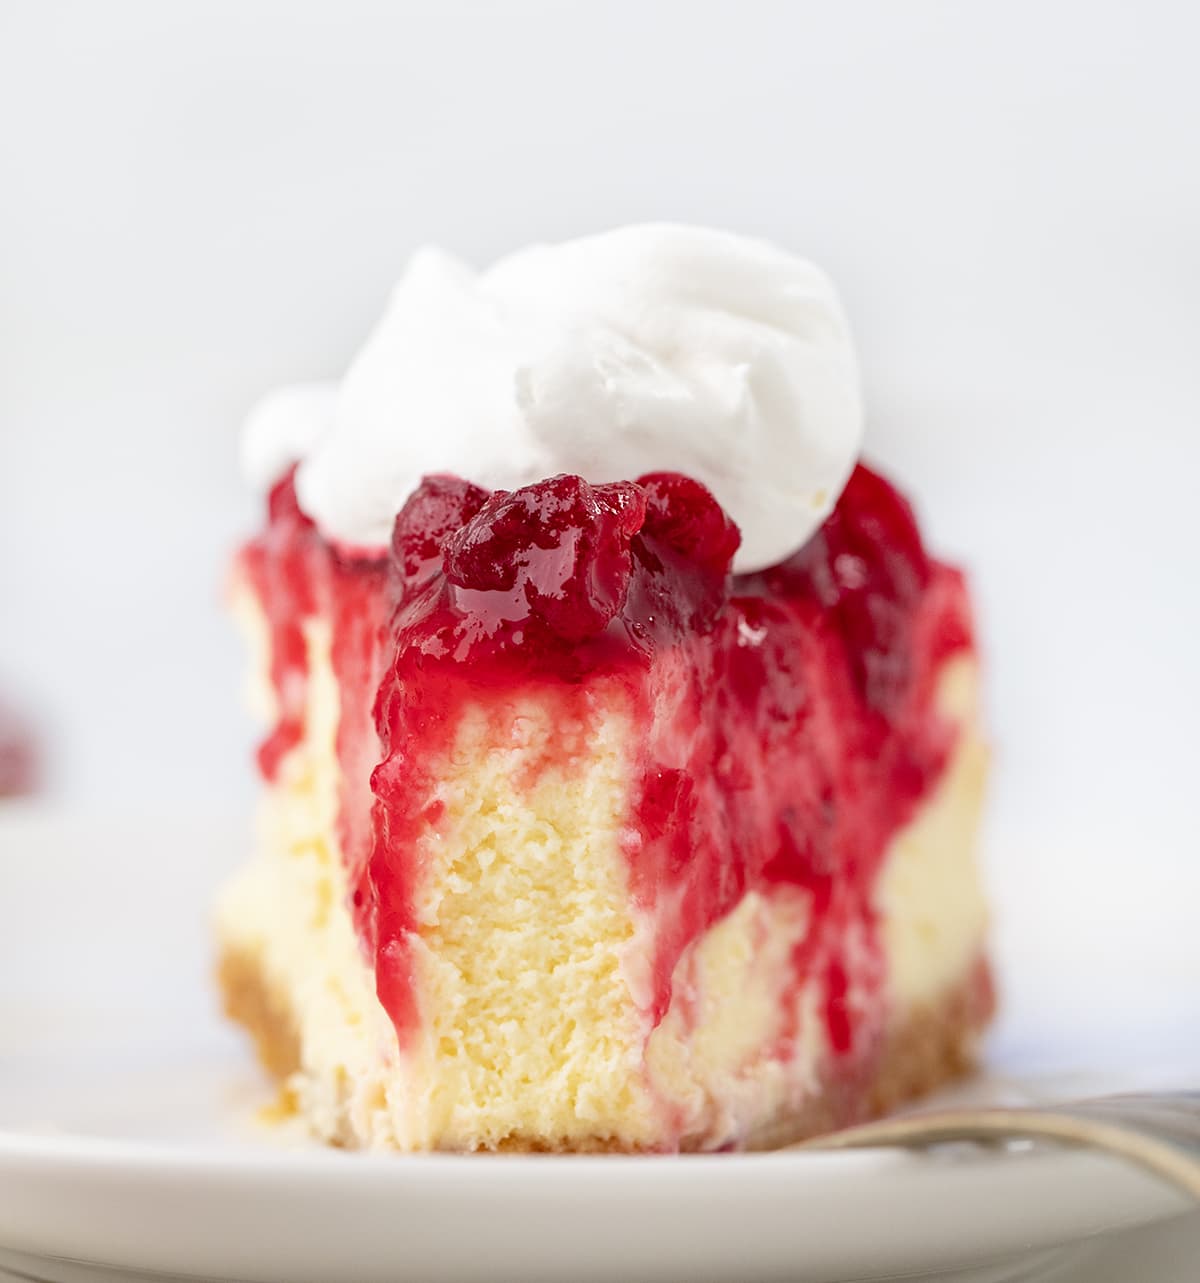 Piece of Cranberry Cheesecake with a bite removed showing texture.